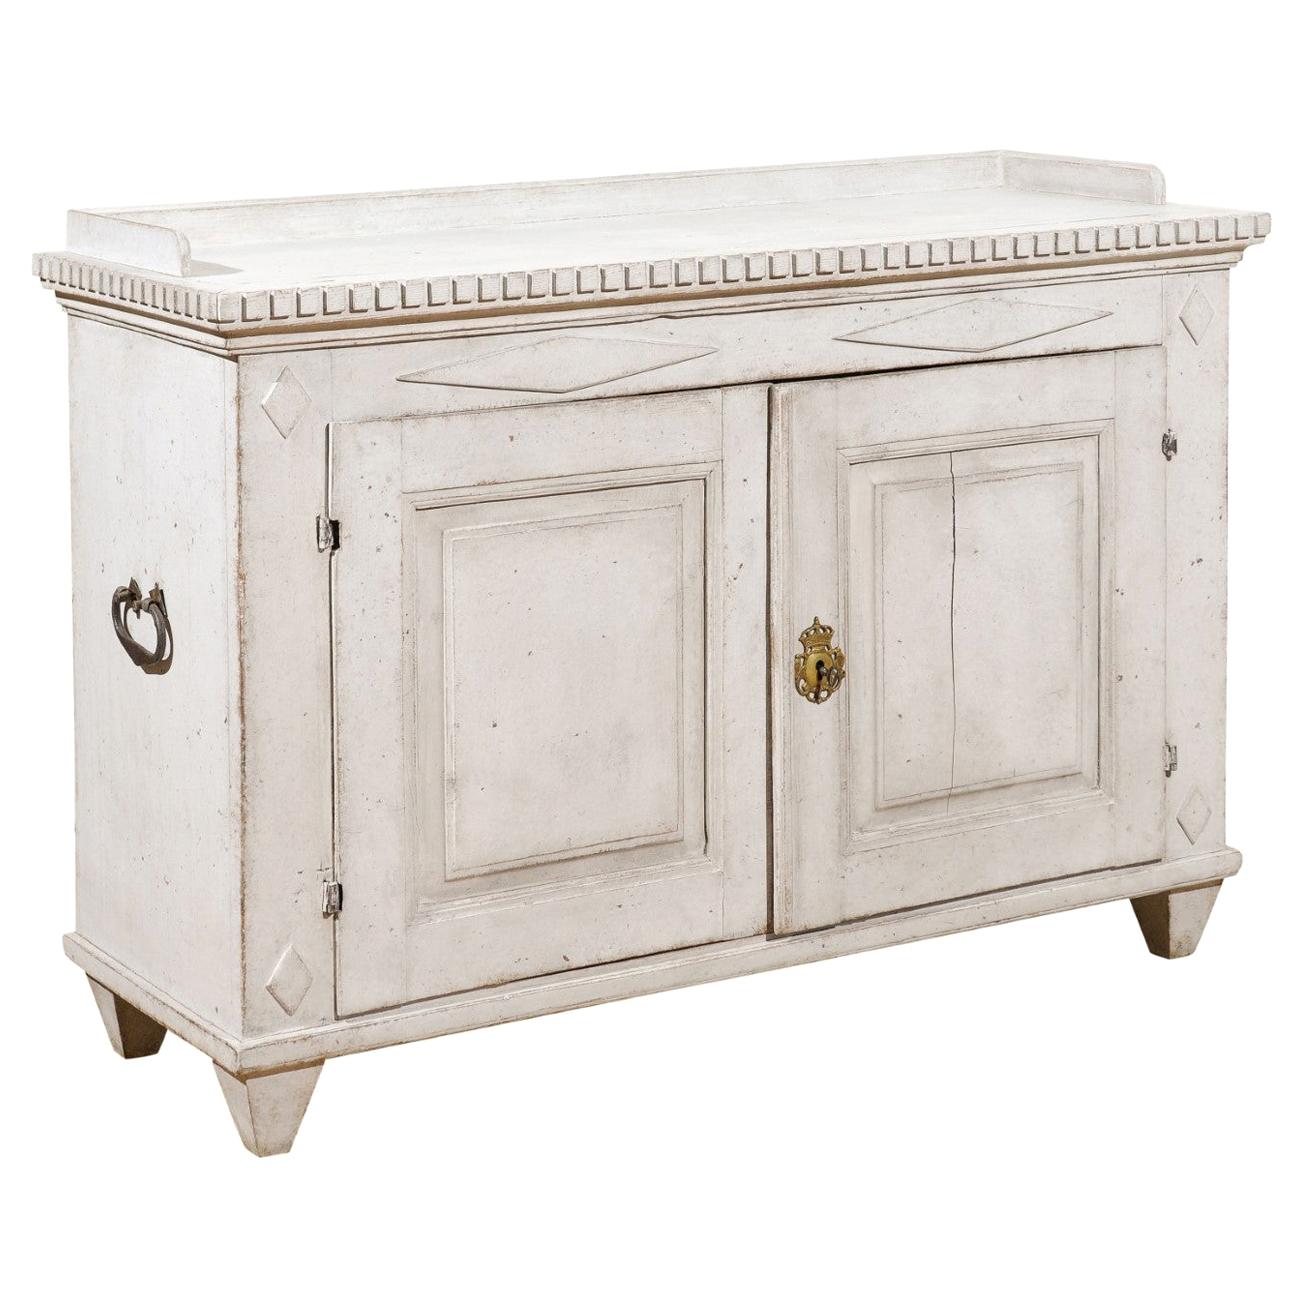 Swedish Gustavian 1790s Painted Sideboard with Dentil Molding and Diamond Motifs